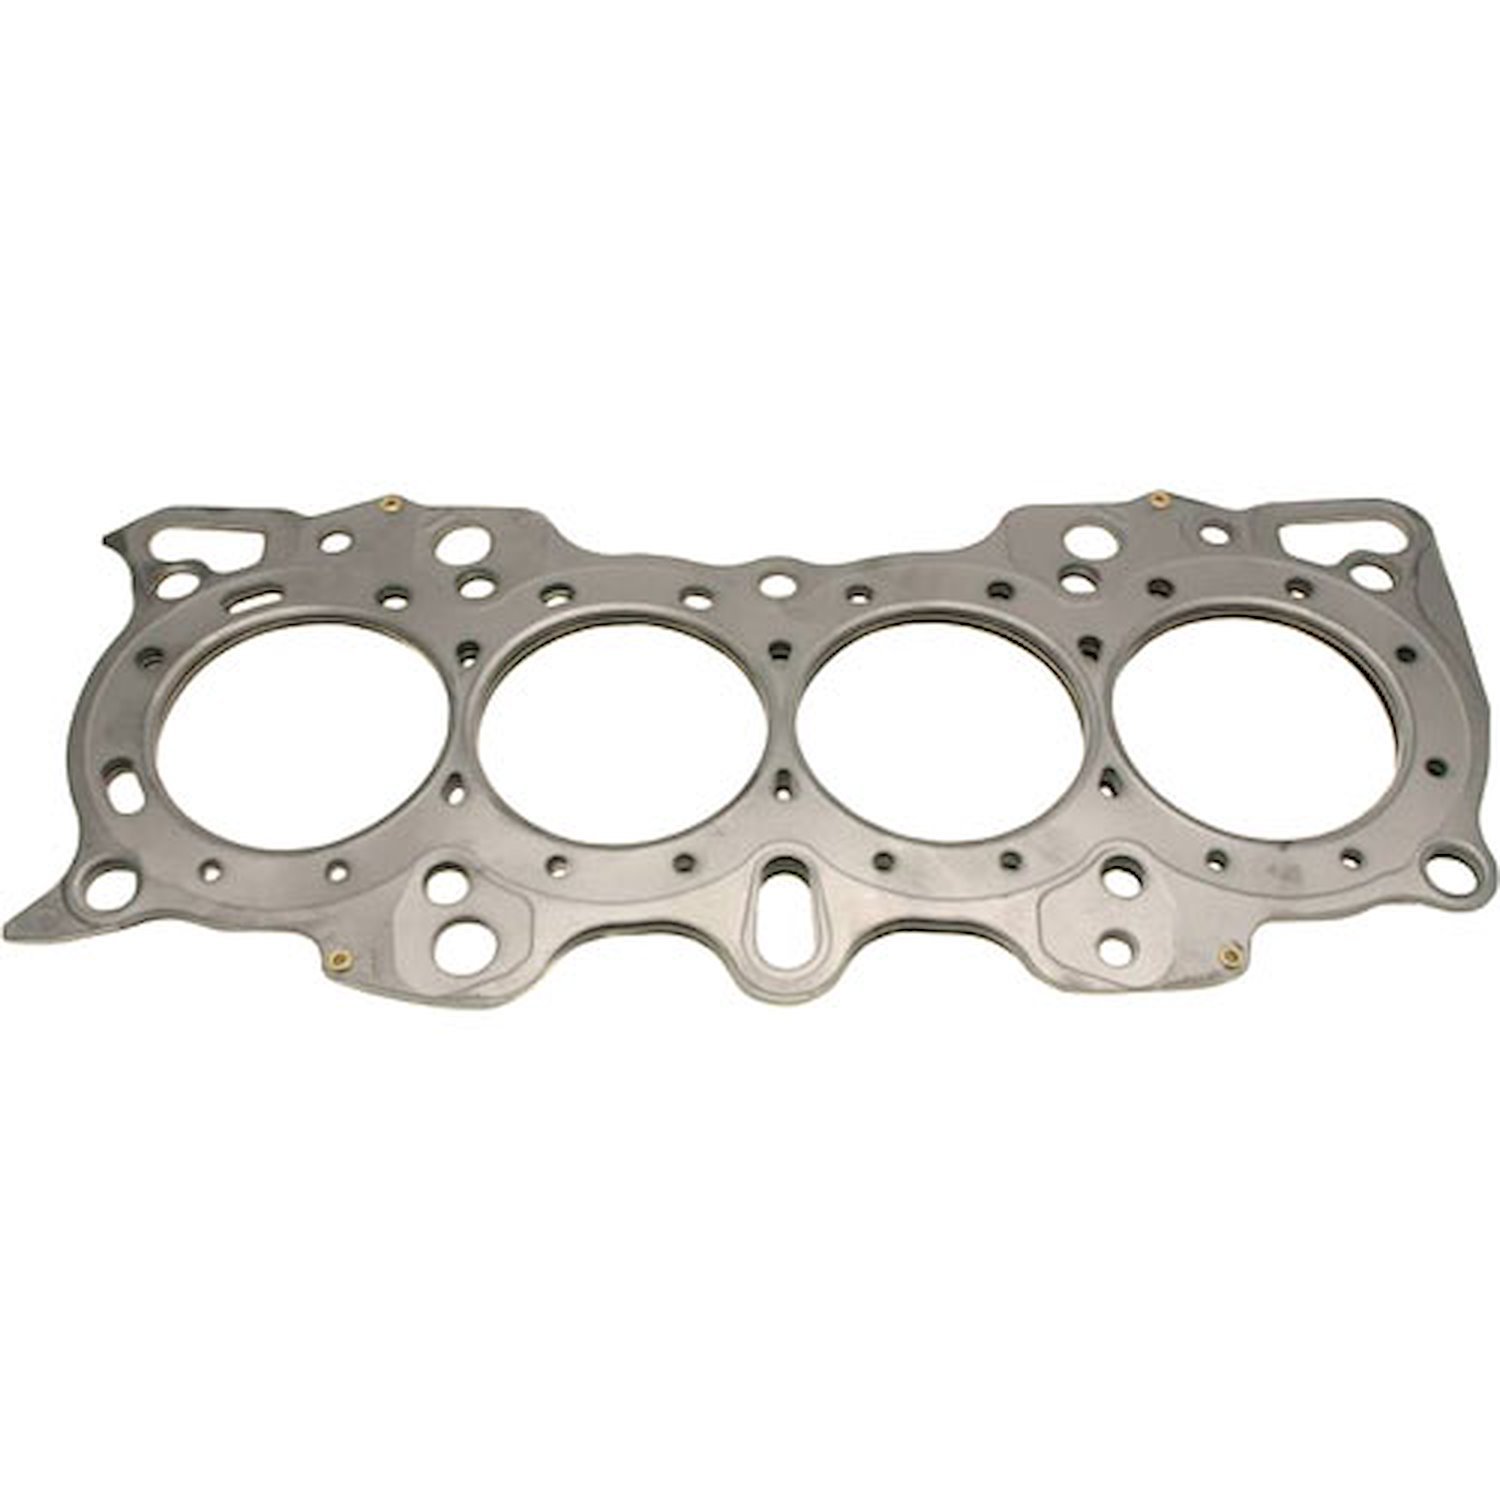 Head Gasket for 1990-2001 Acura Integra with B18A1/B18B1 Engines